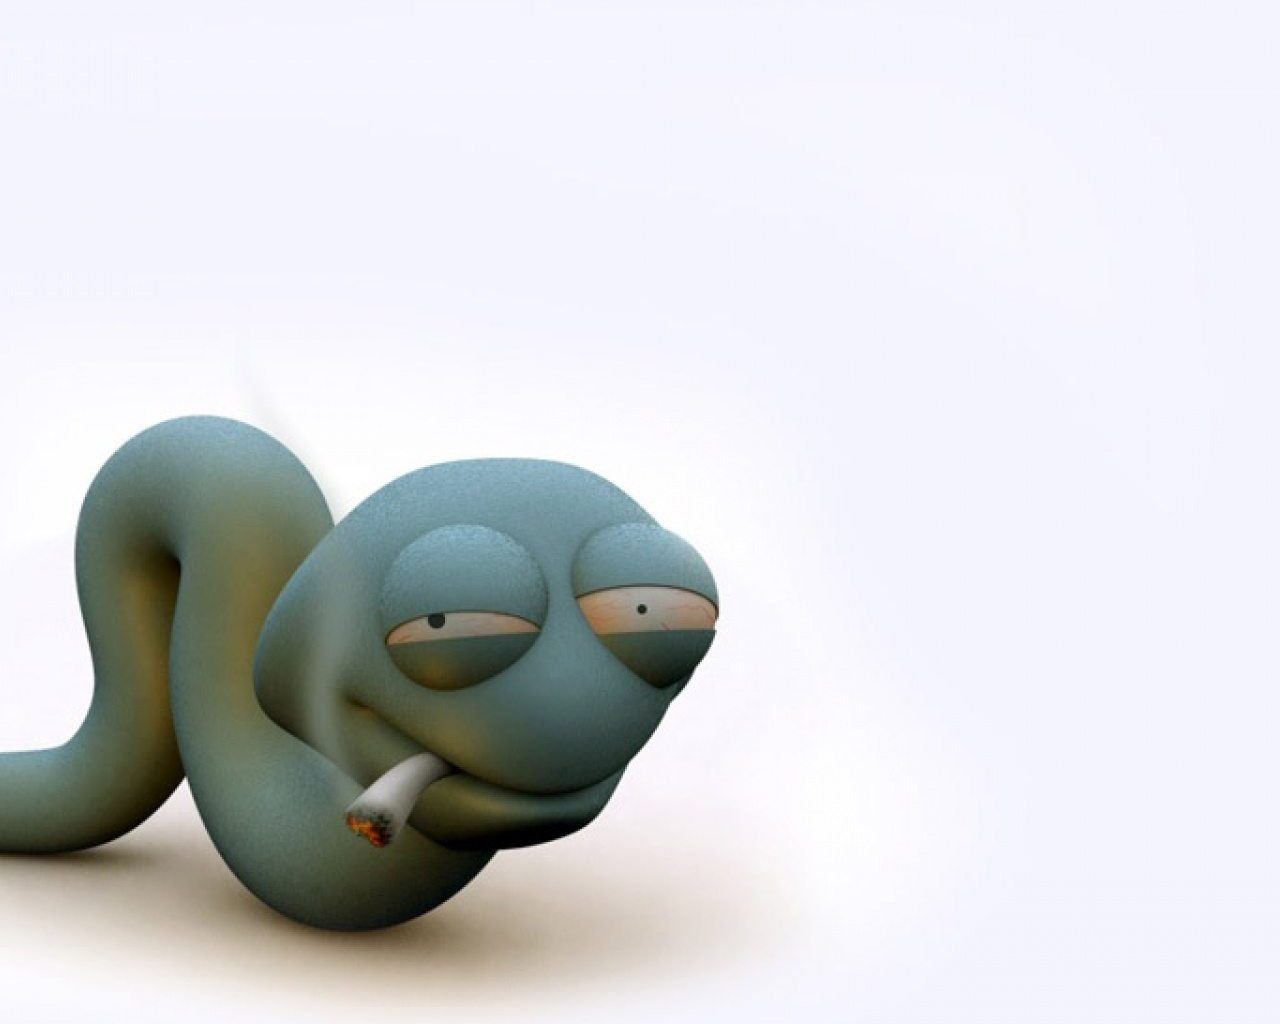 3D snake 1280x1024 Wallpapers, 1280x1024 Wallpapers & Pictures ...